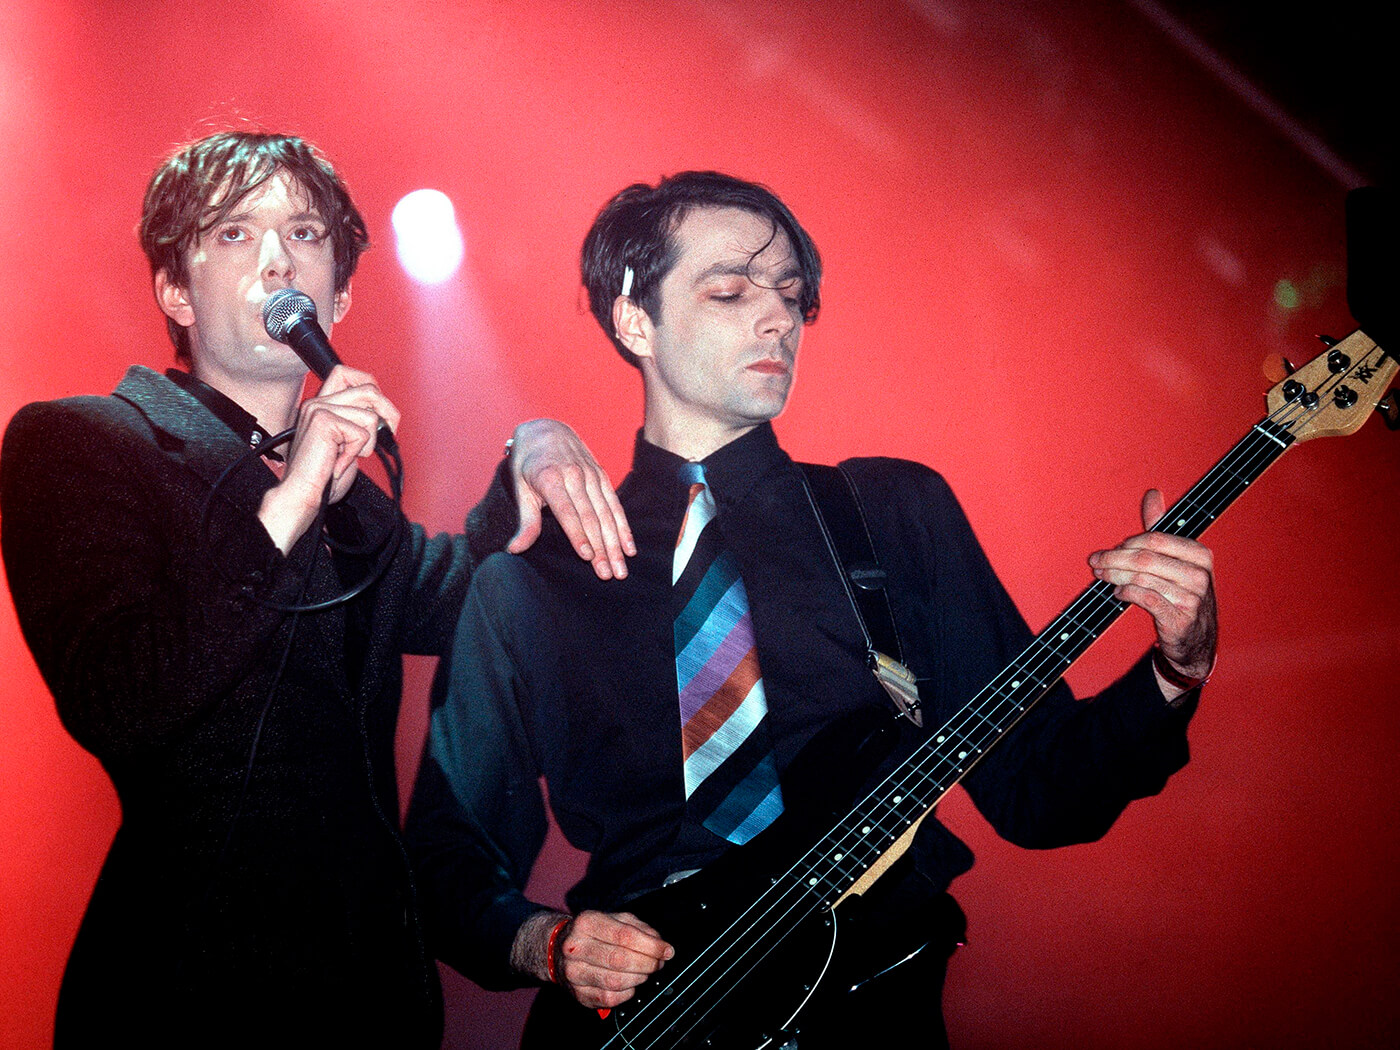 Jarvis Cocker and Steve Mackey of Pulp